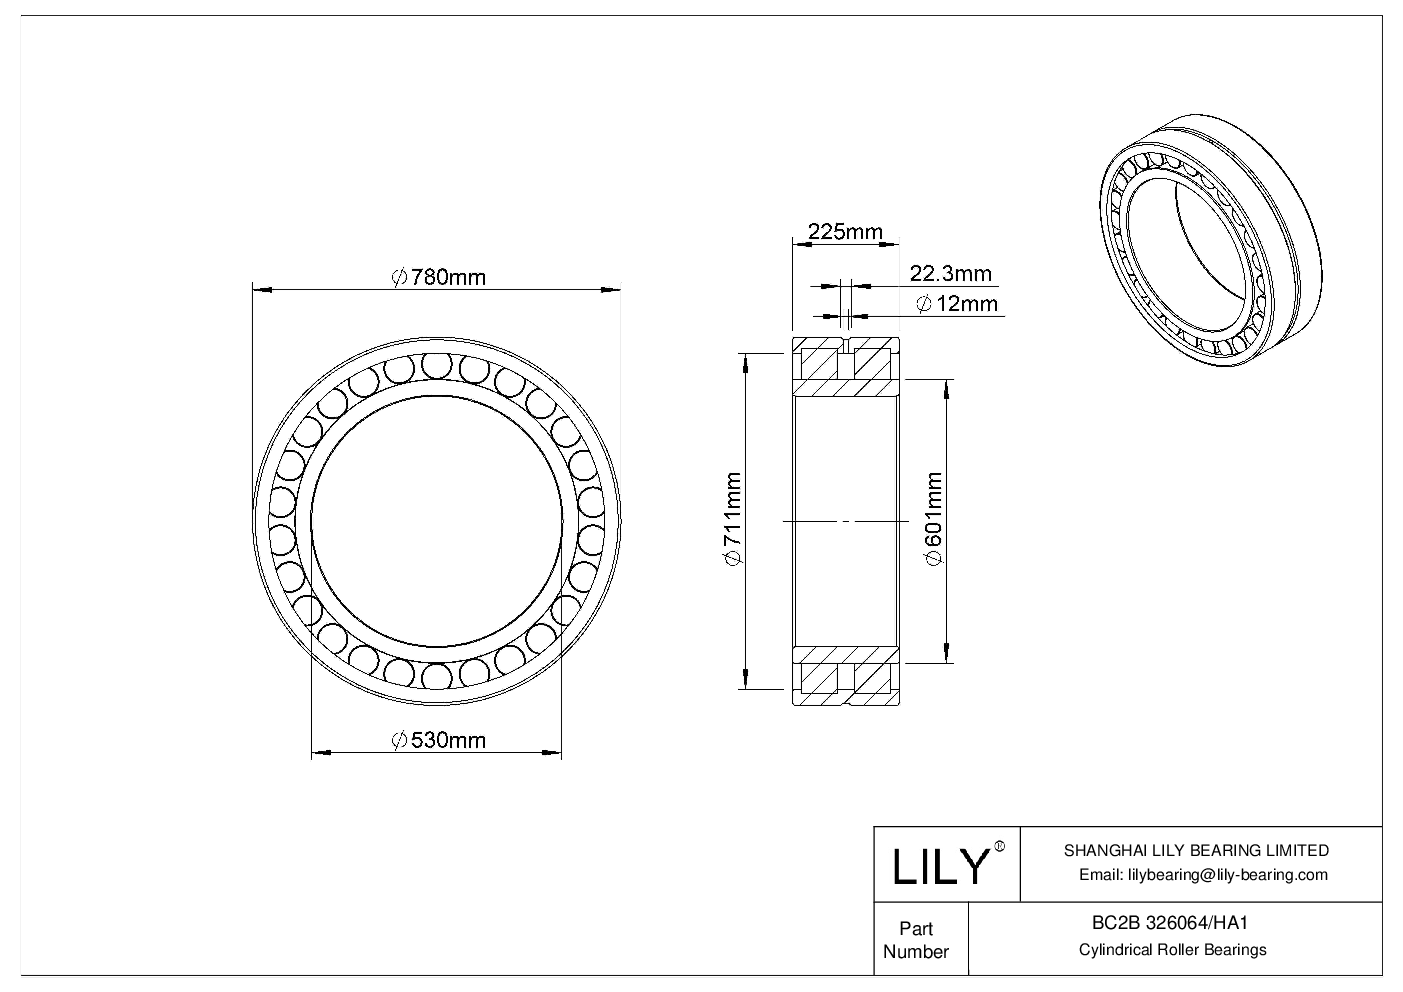 BC2B 326064/HA1 Double Row Cylindrical Roller Bearings cad drawing